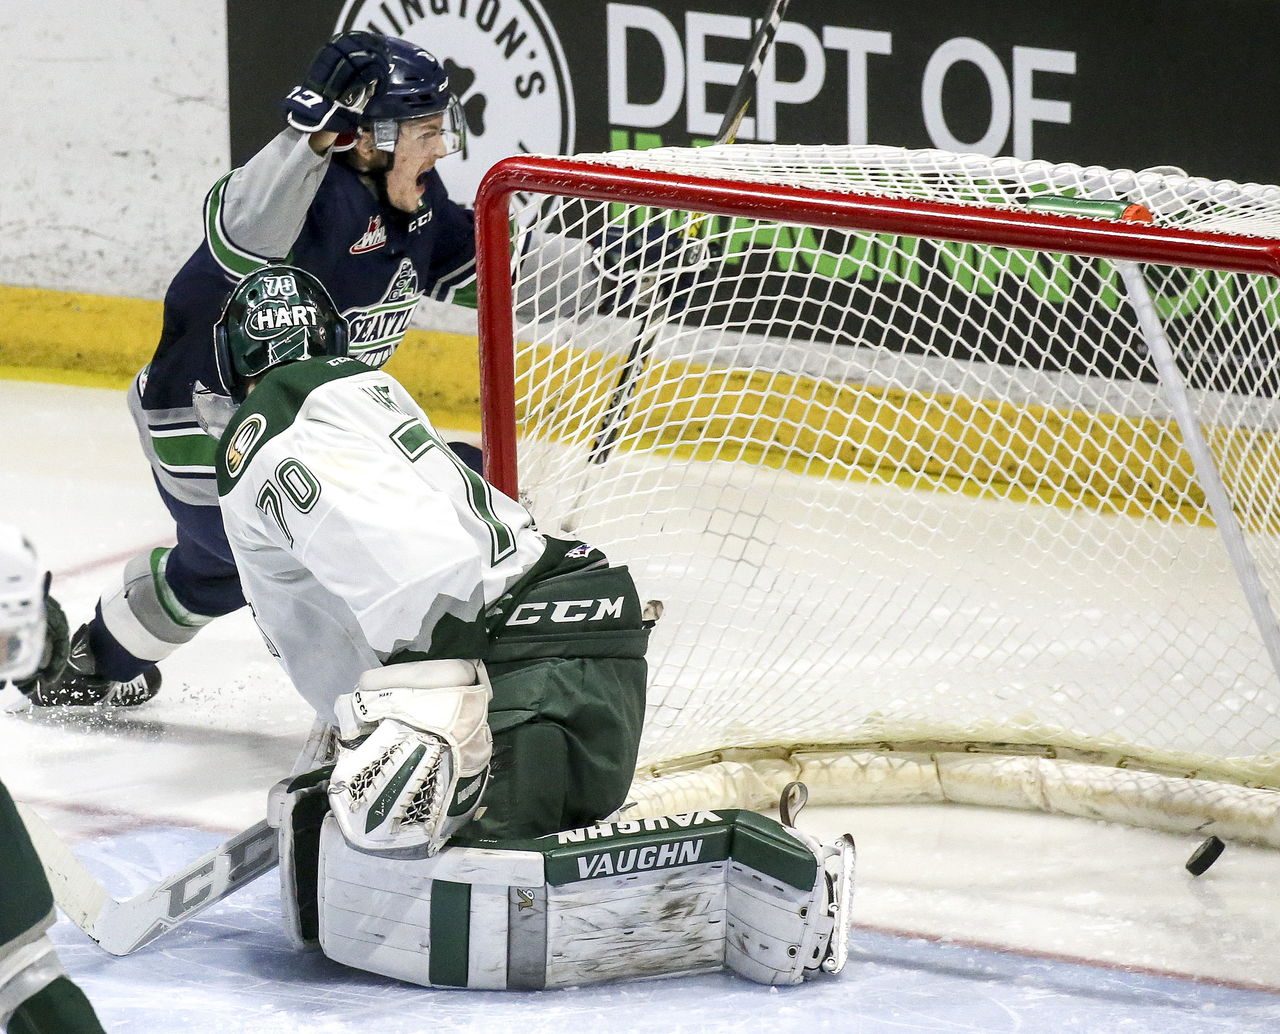 The Thunderbirds’ Scott Eansor celebrates his goal past Silvertips goaltender Carter Hart in the second period of a playoff game Wednesday night in Everett.